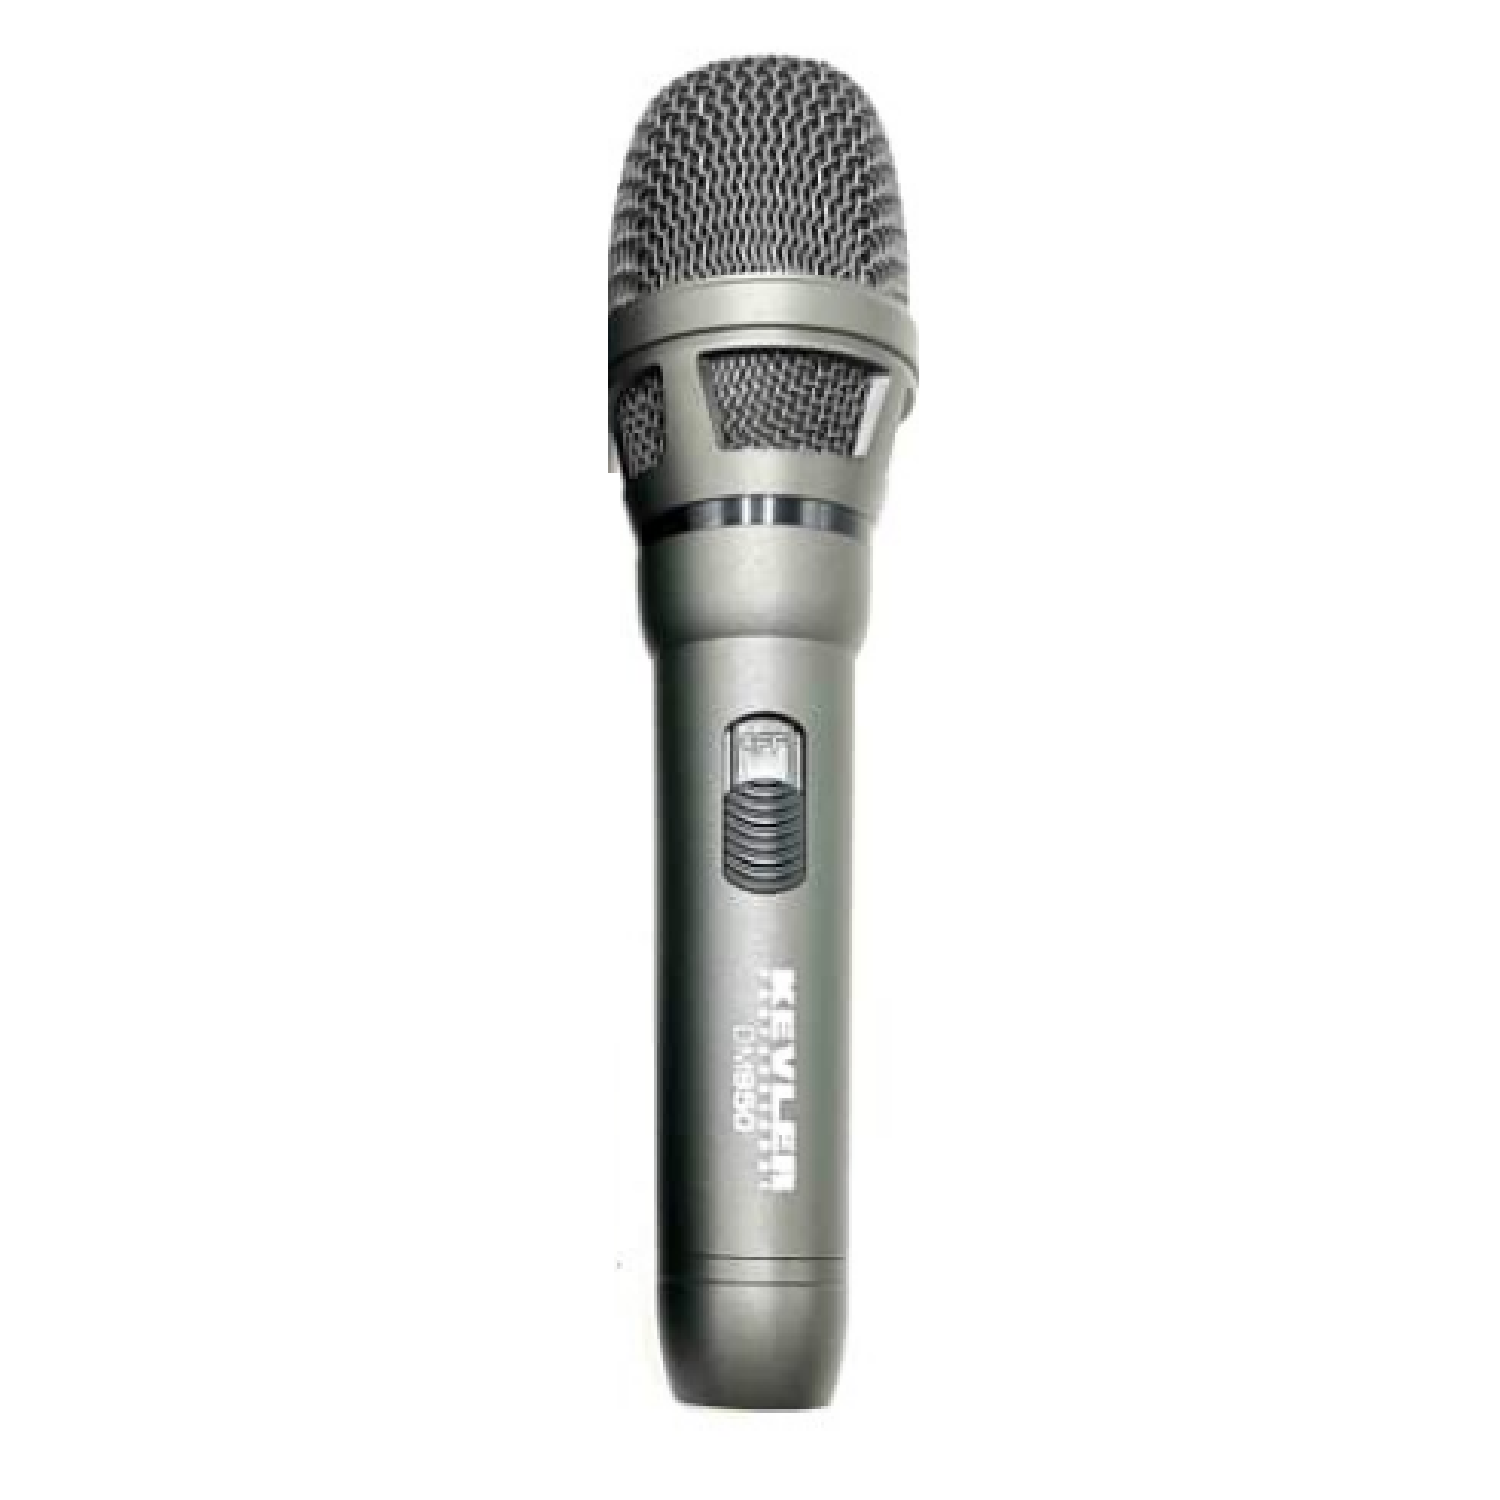 Supercardioid Dynamic Microphone with 10 Meters Cable   DM950 kevler